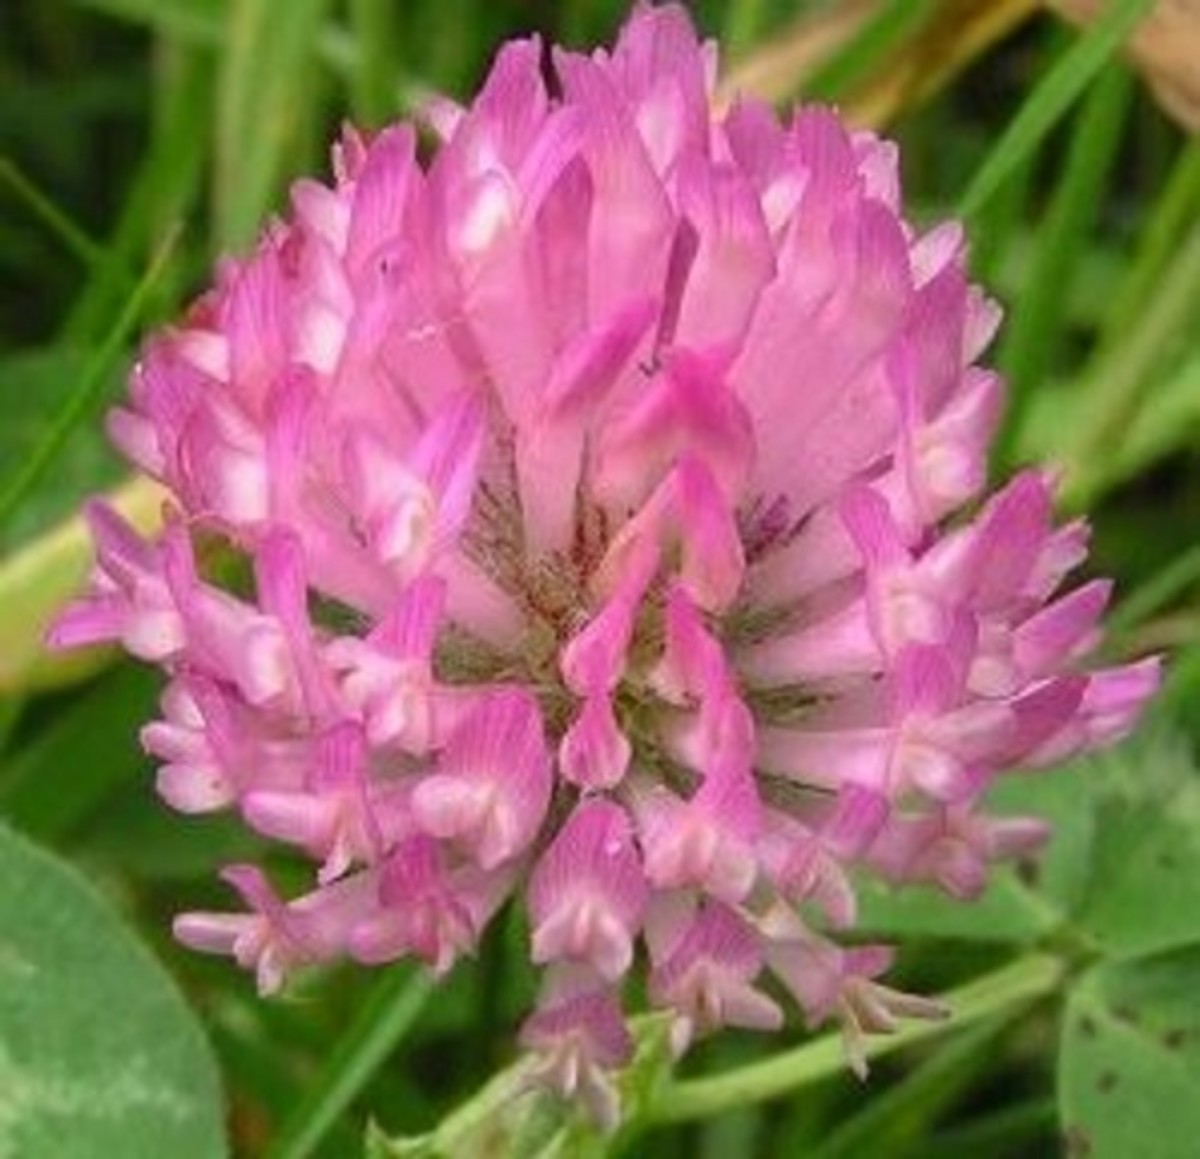 9. Red Clover